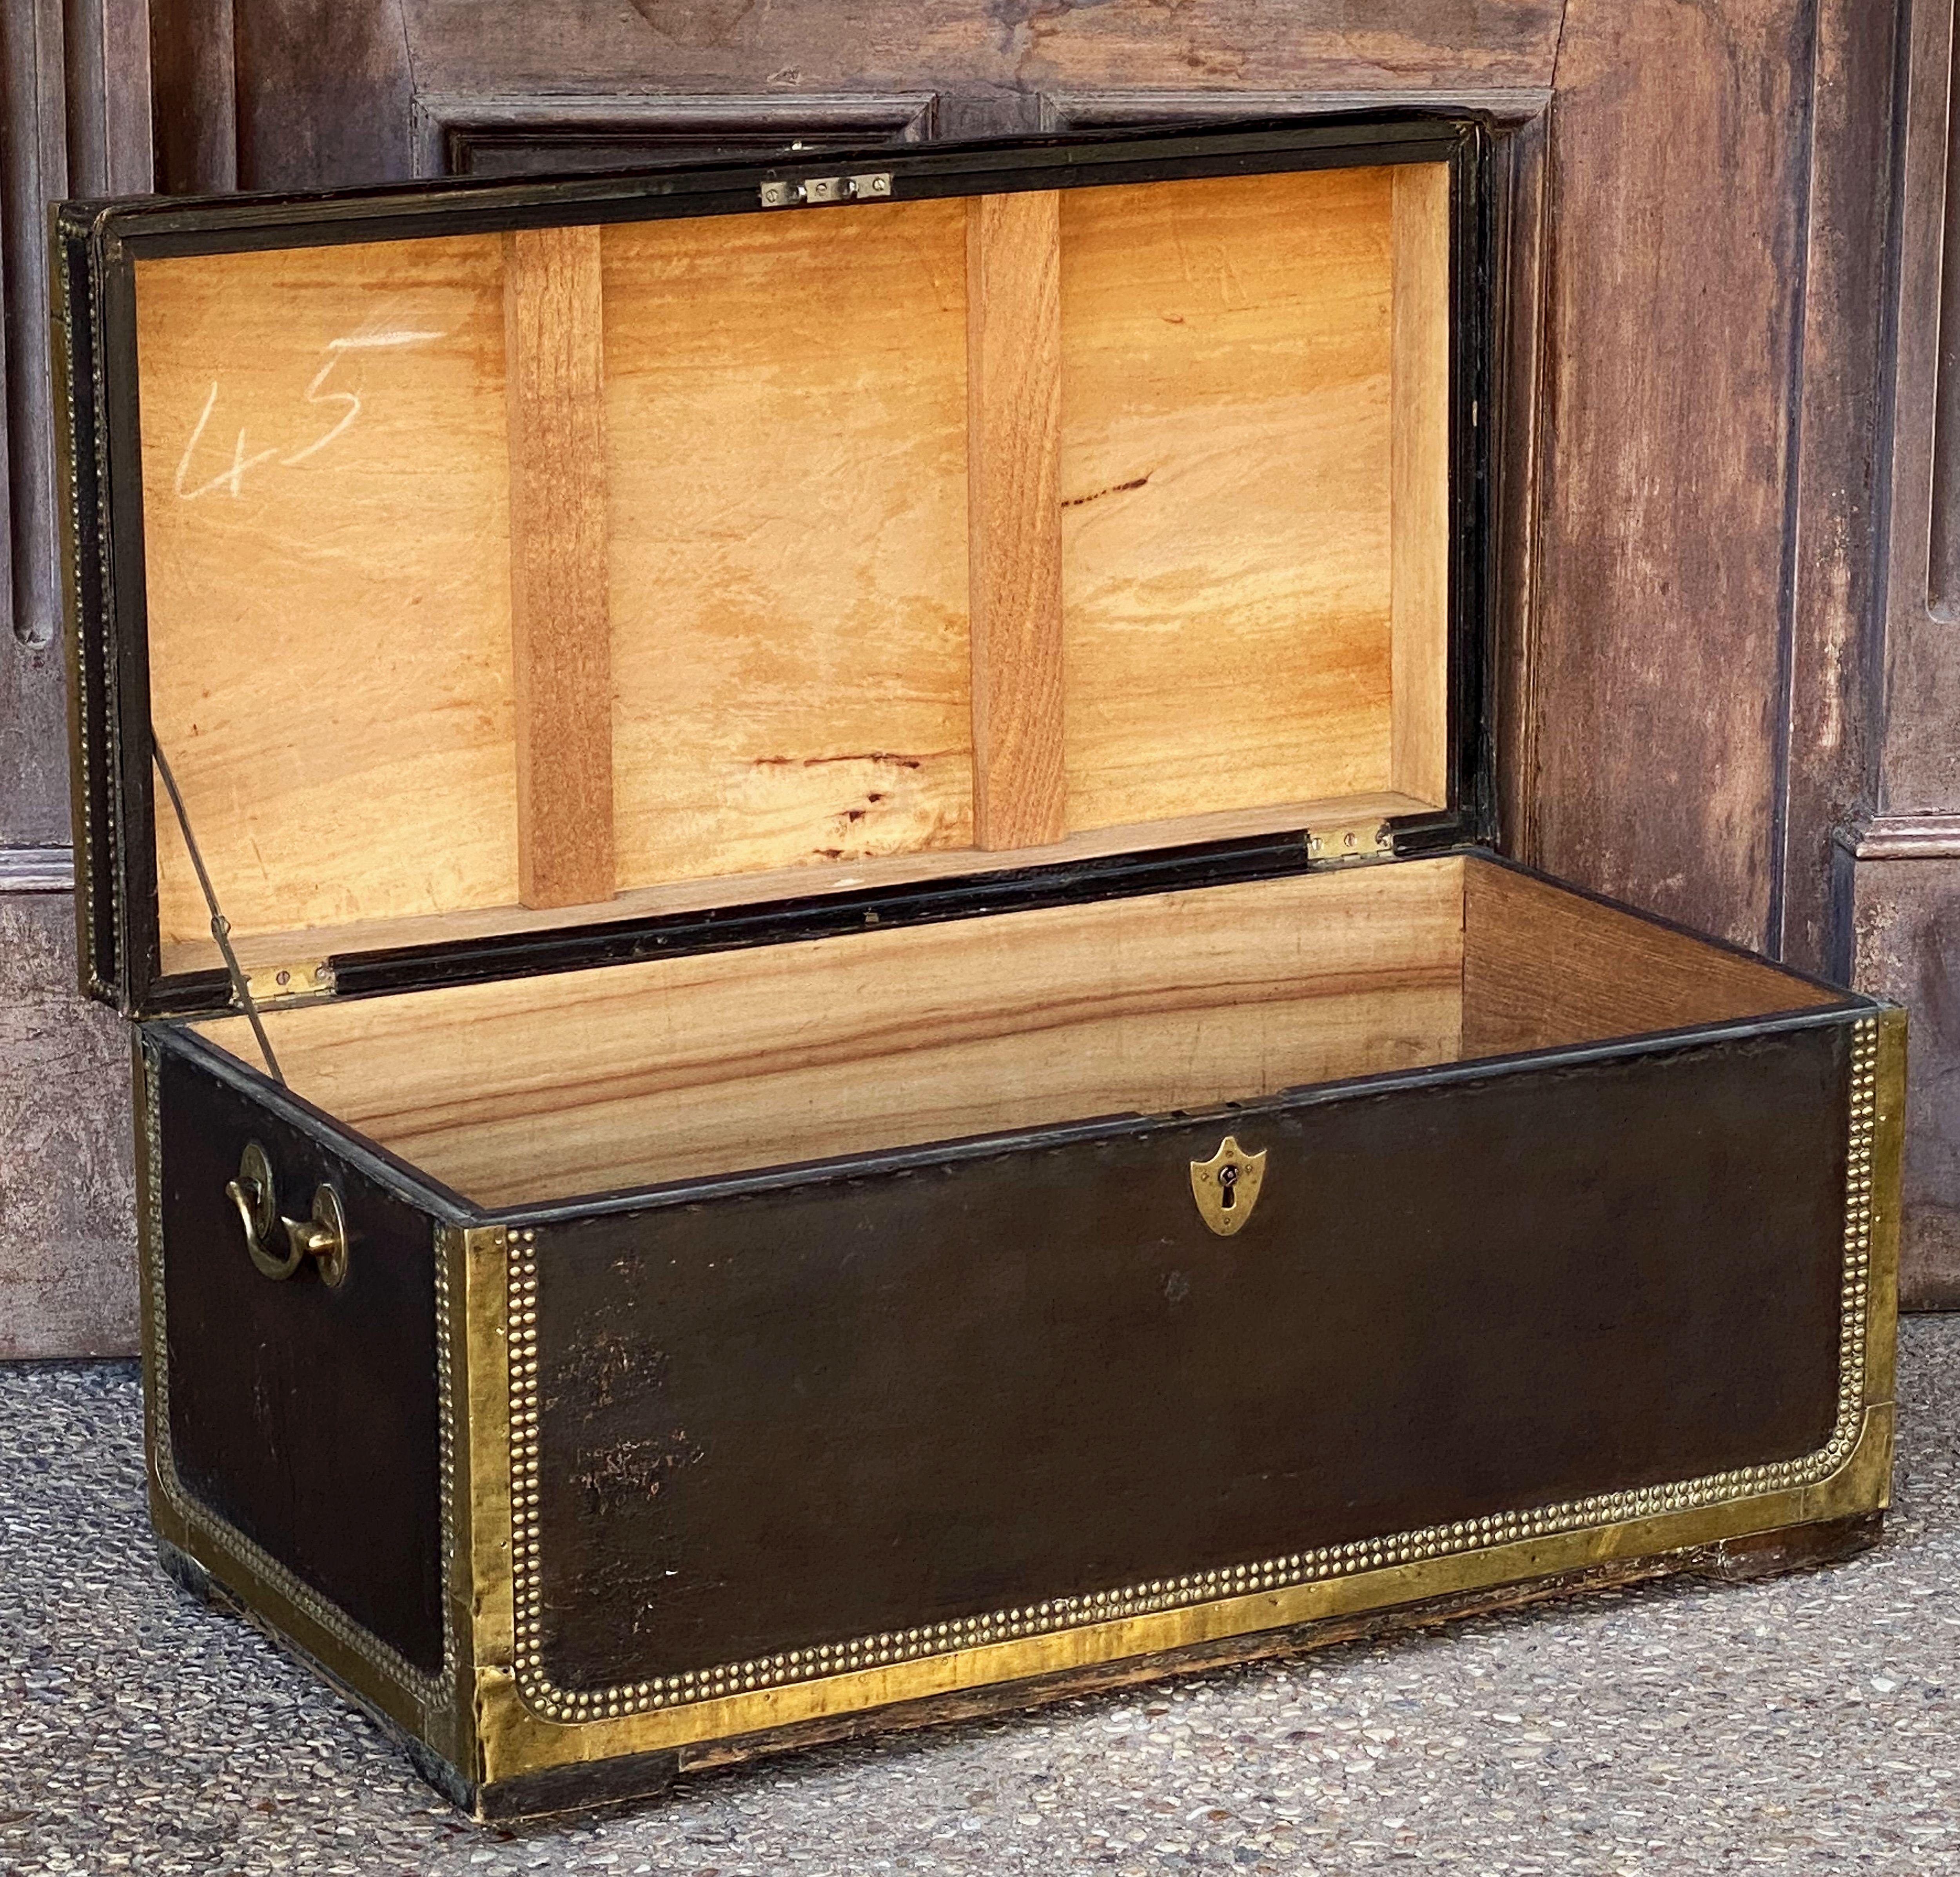 English Campaign Trunk of Brass-Bound Leather and Camphor Wood, Circa 1820 7